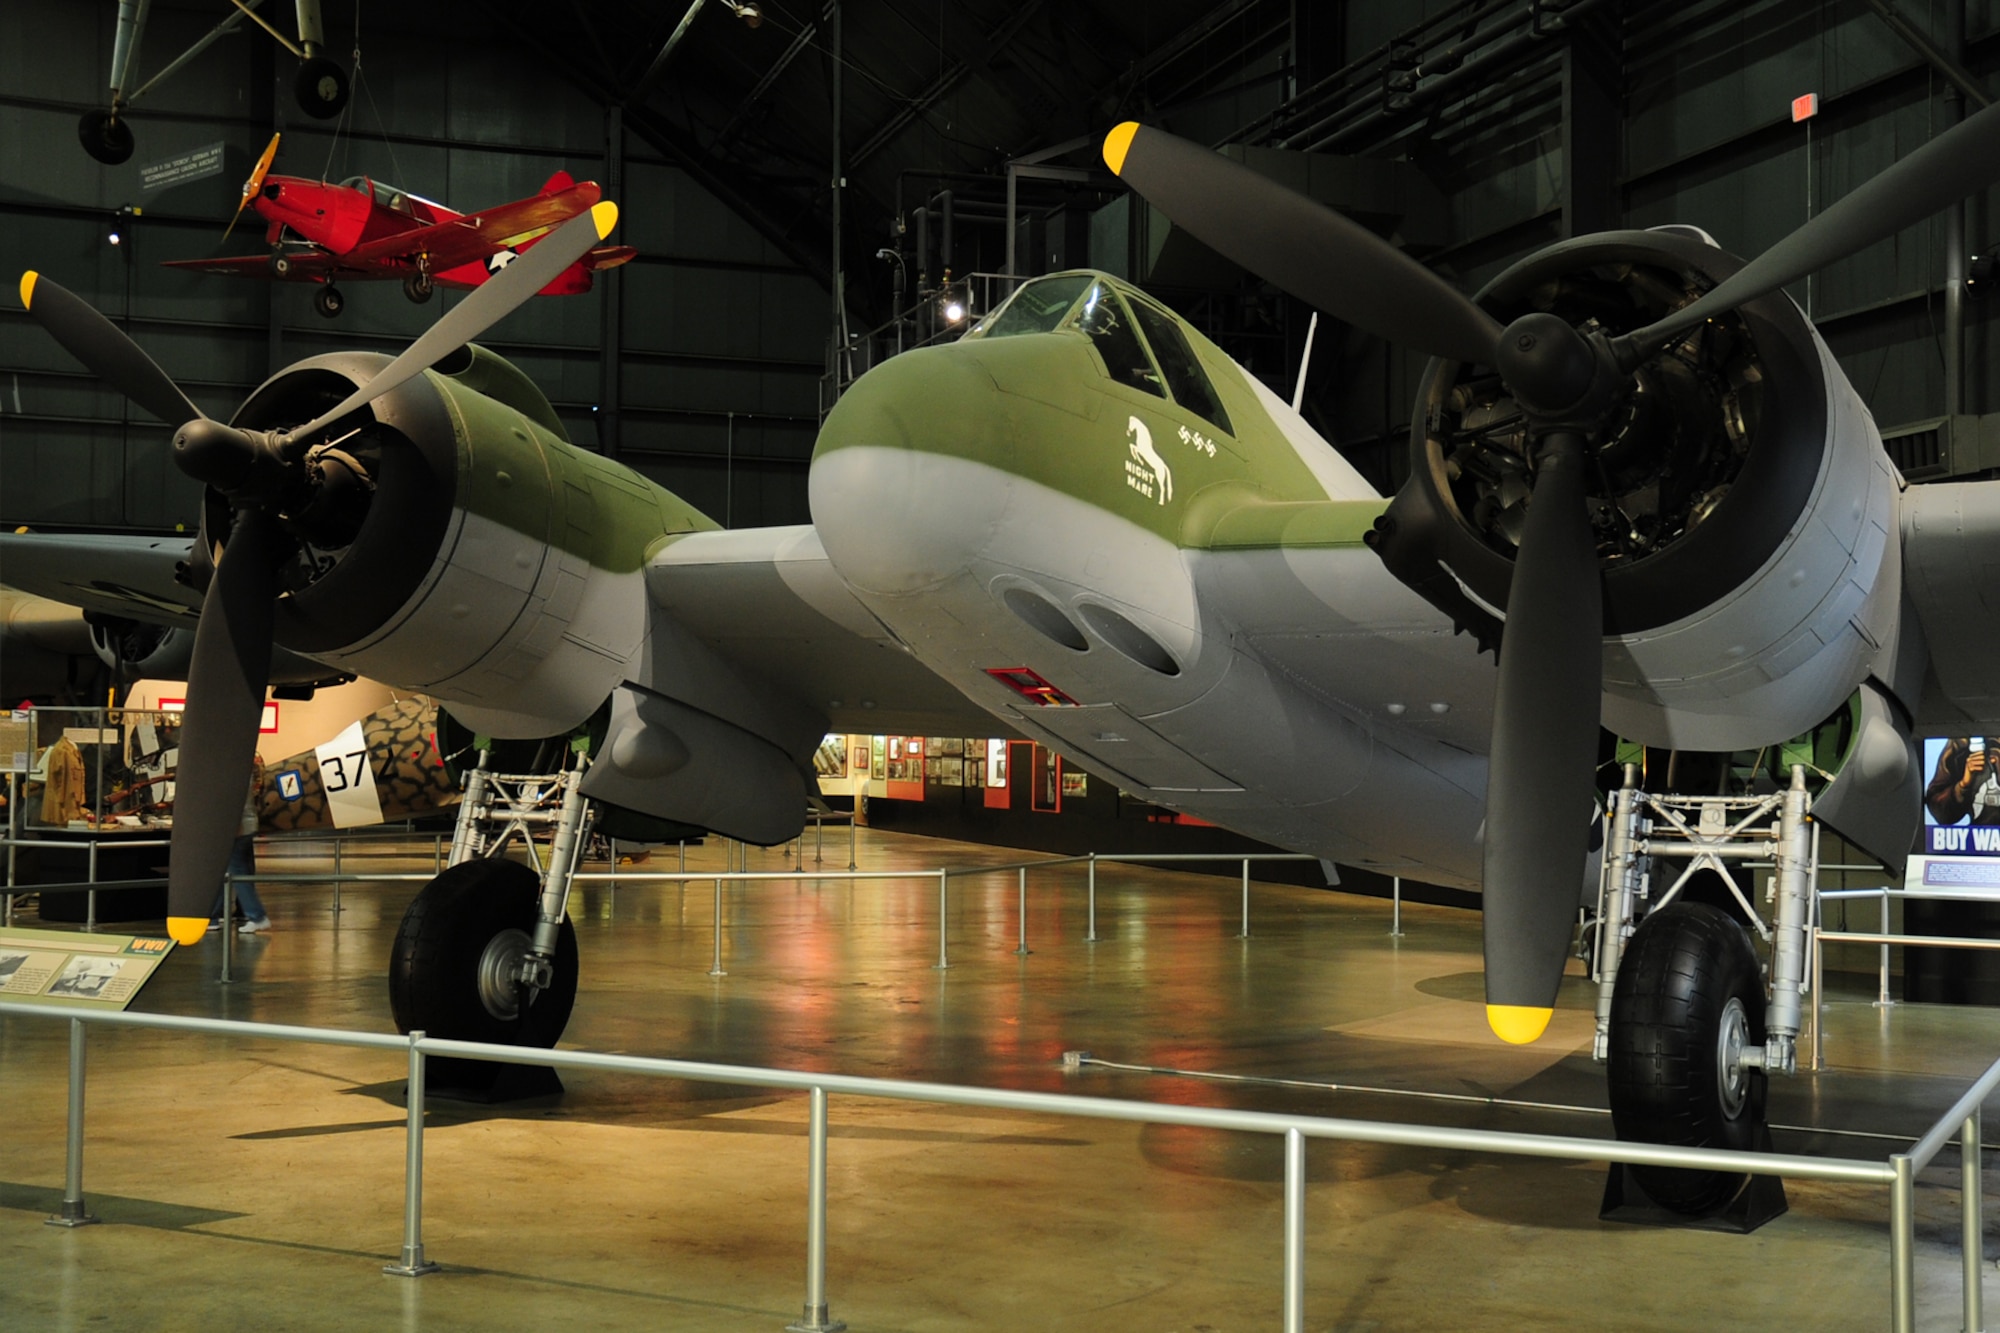 DAYTON, Ohio -- Bristol Beaufighter in the World War II Gallery at the National Museum of the United States Air Force. (U.S. Air Force Photo)